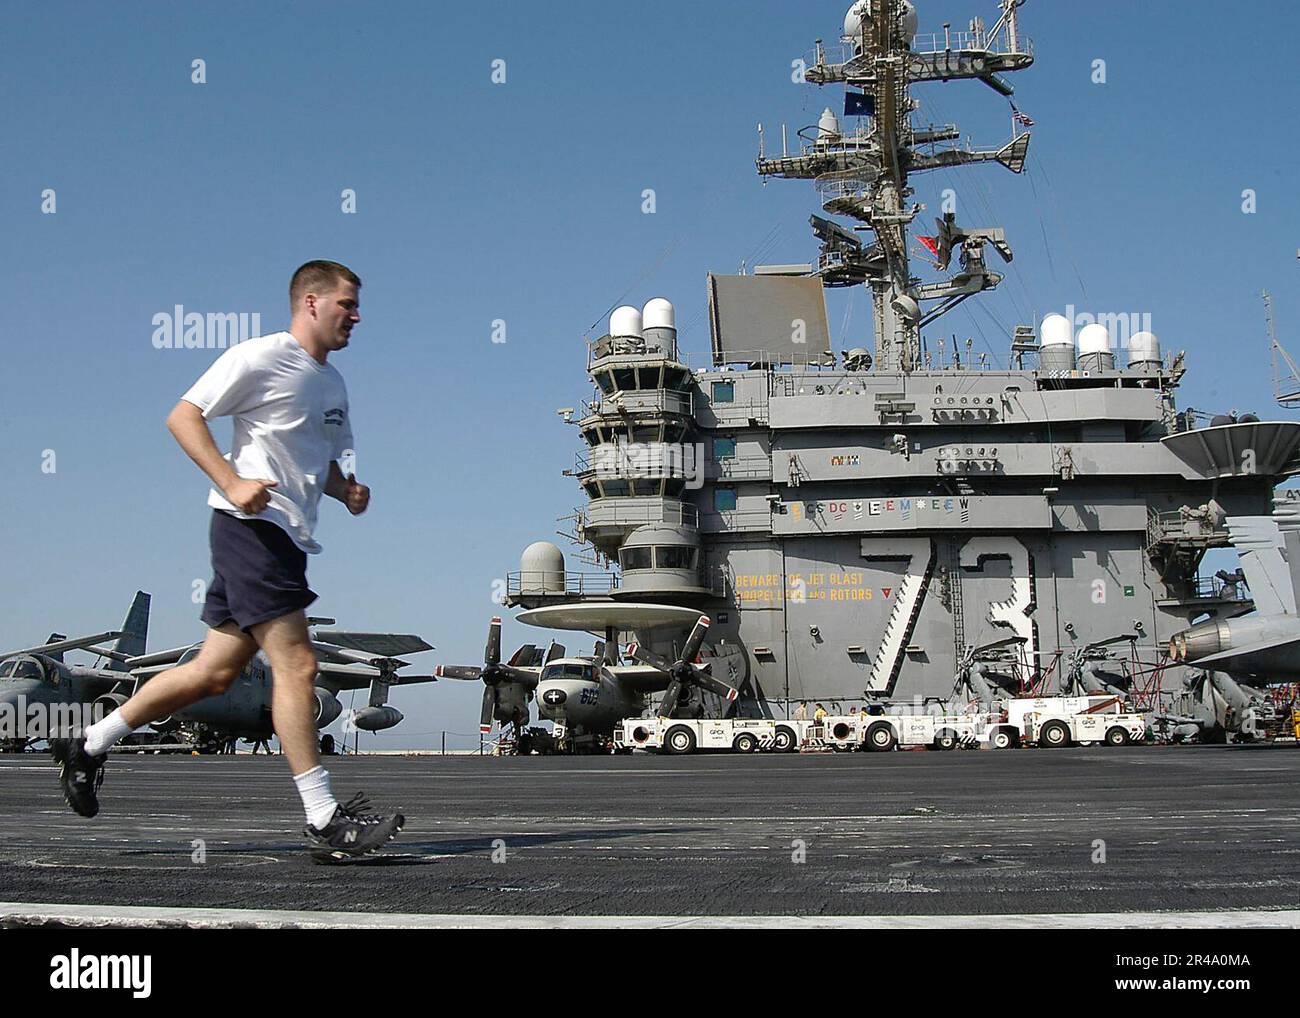 US Navy  Lt. j.g. get in his exercise routine as he runs on the flight deck, during a no-fly day aboard USS George Washington (CVN 73). Stock Photo